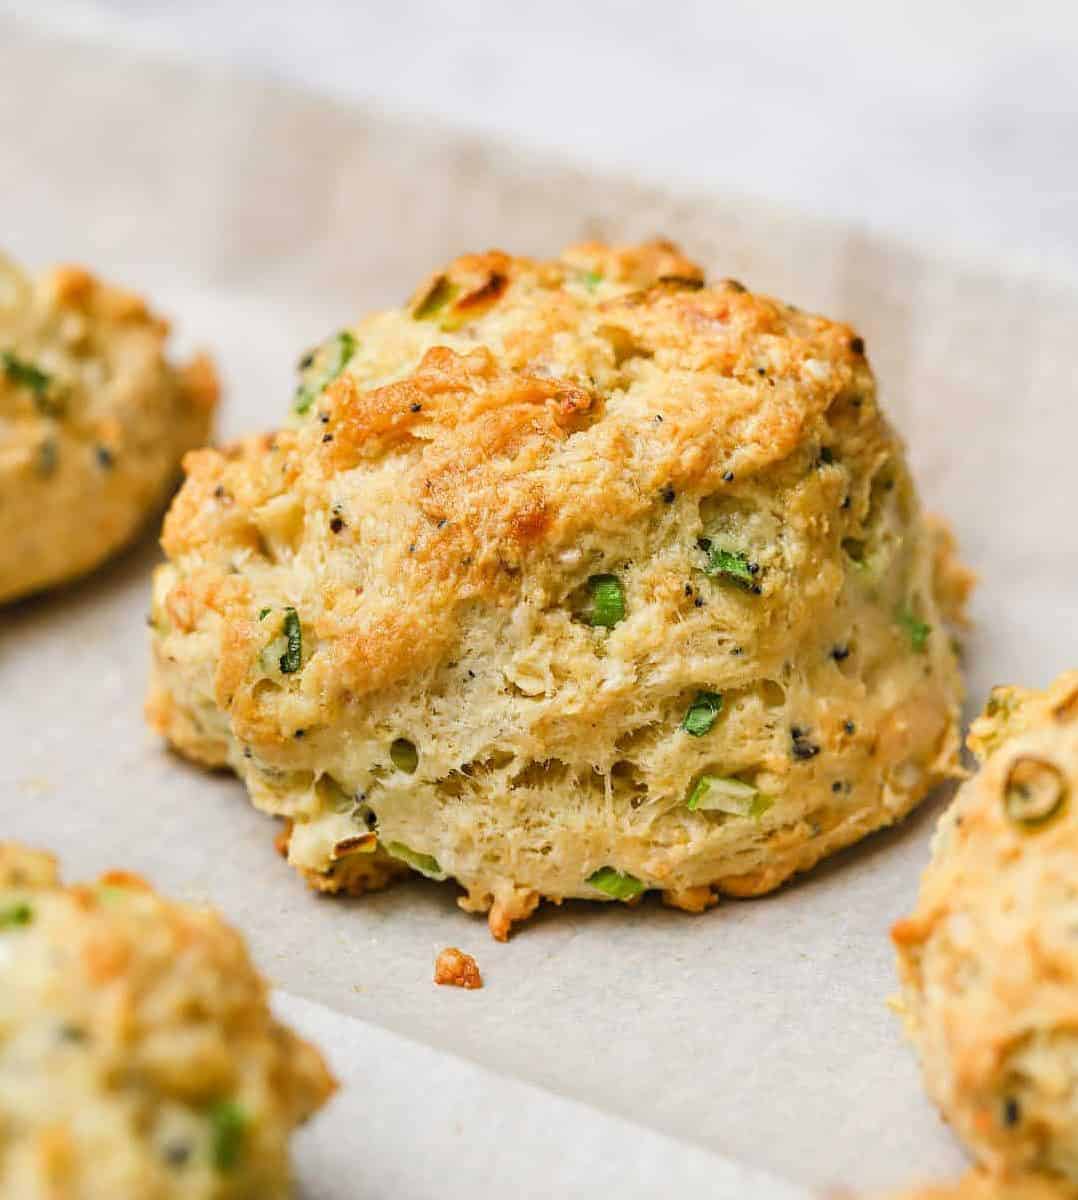  Flavored with savory scallions and cheesy vegan cheddar, these biscuits smell and taste delicious.